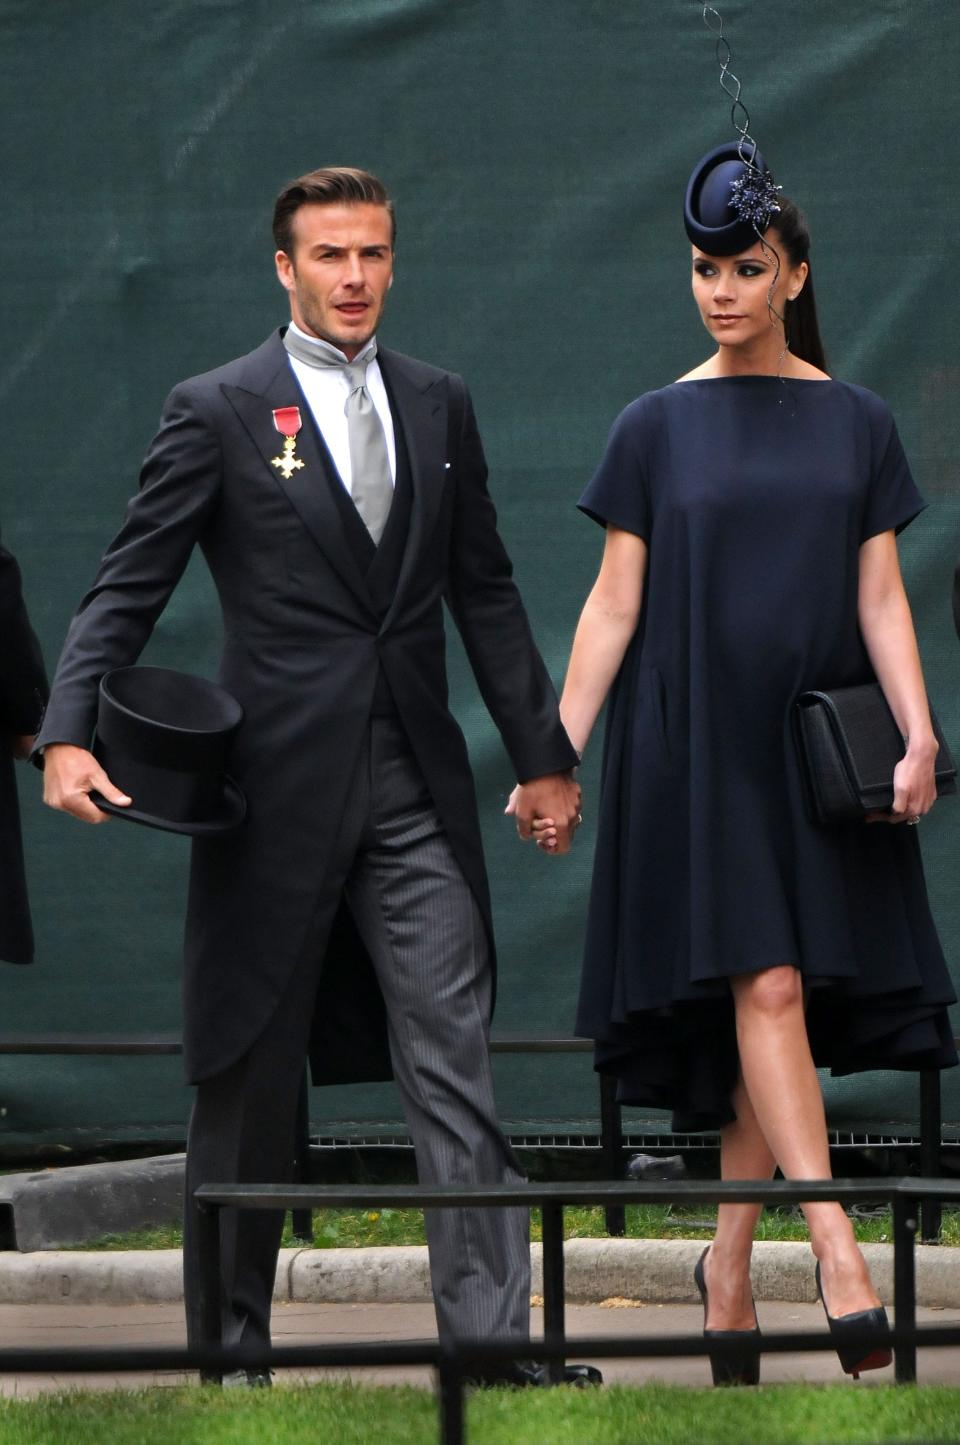 David Beckham and Victoria Beckham at Prince William and Kate Middleton's wedding on April 29, 2011 in London, UK.